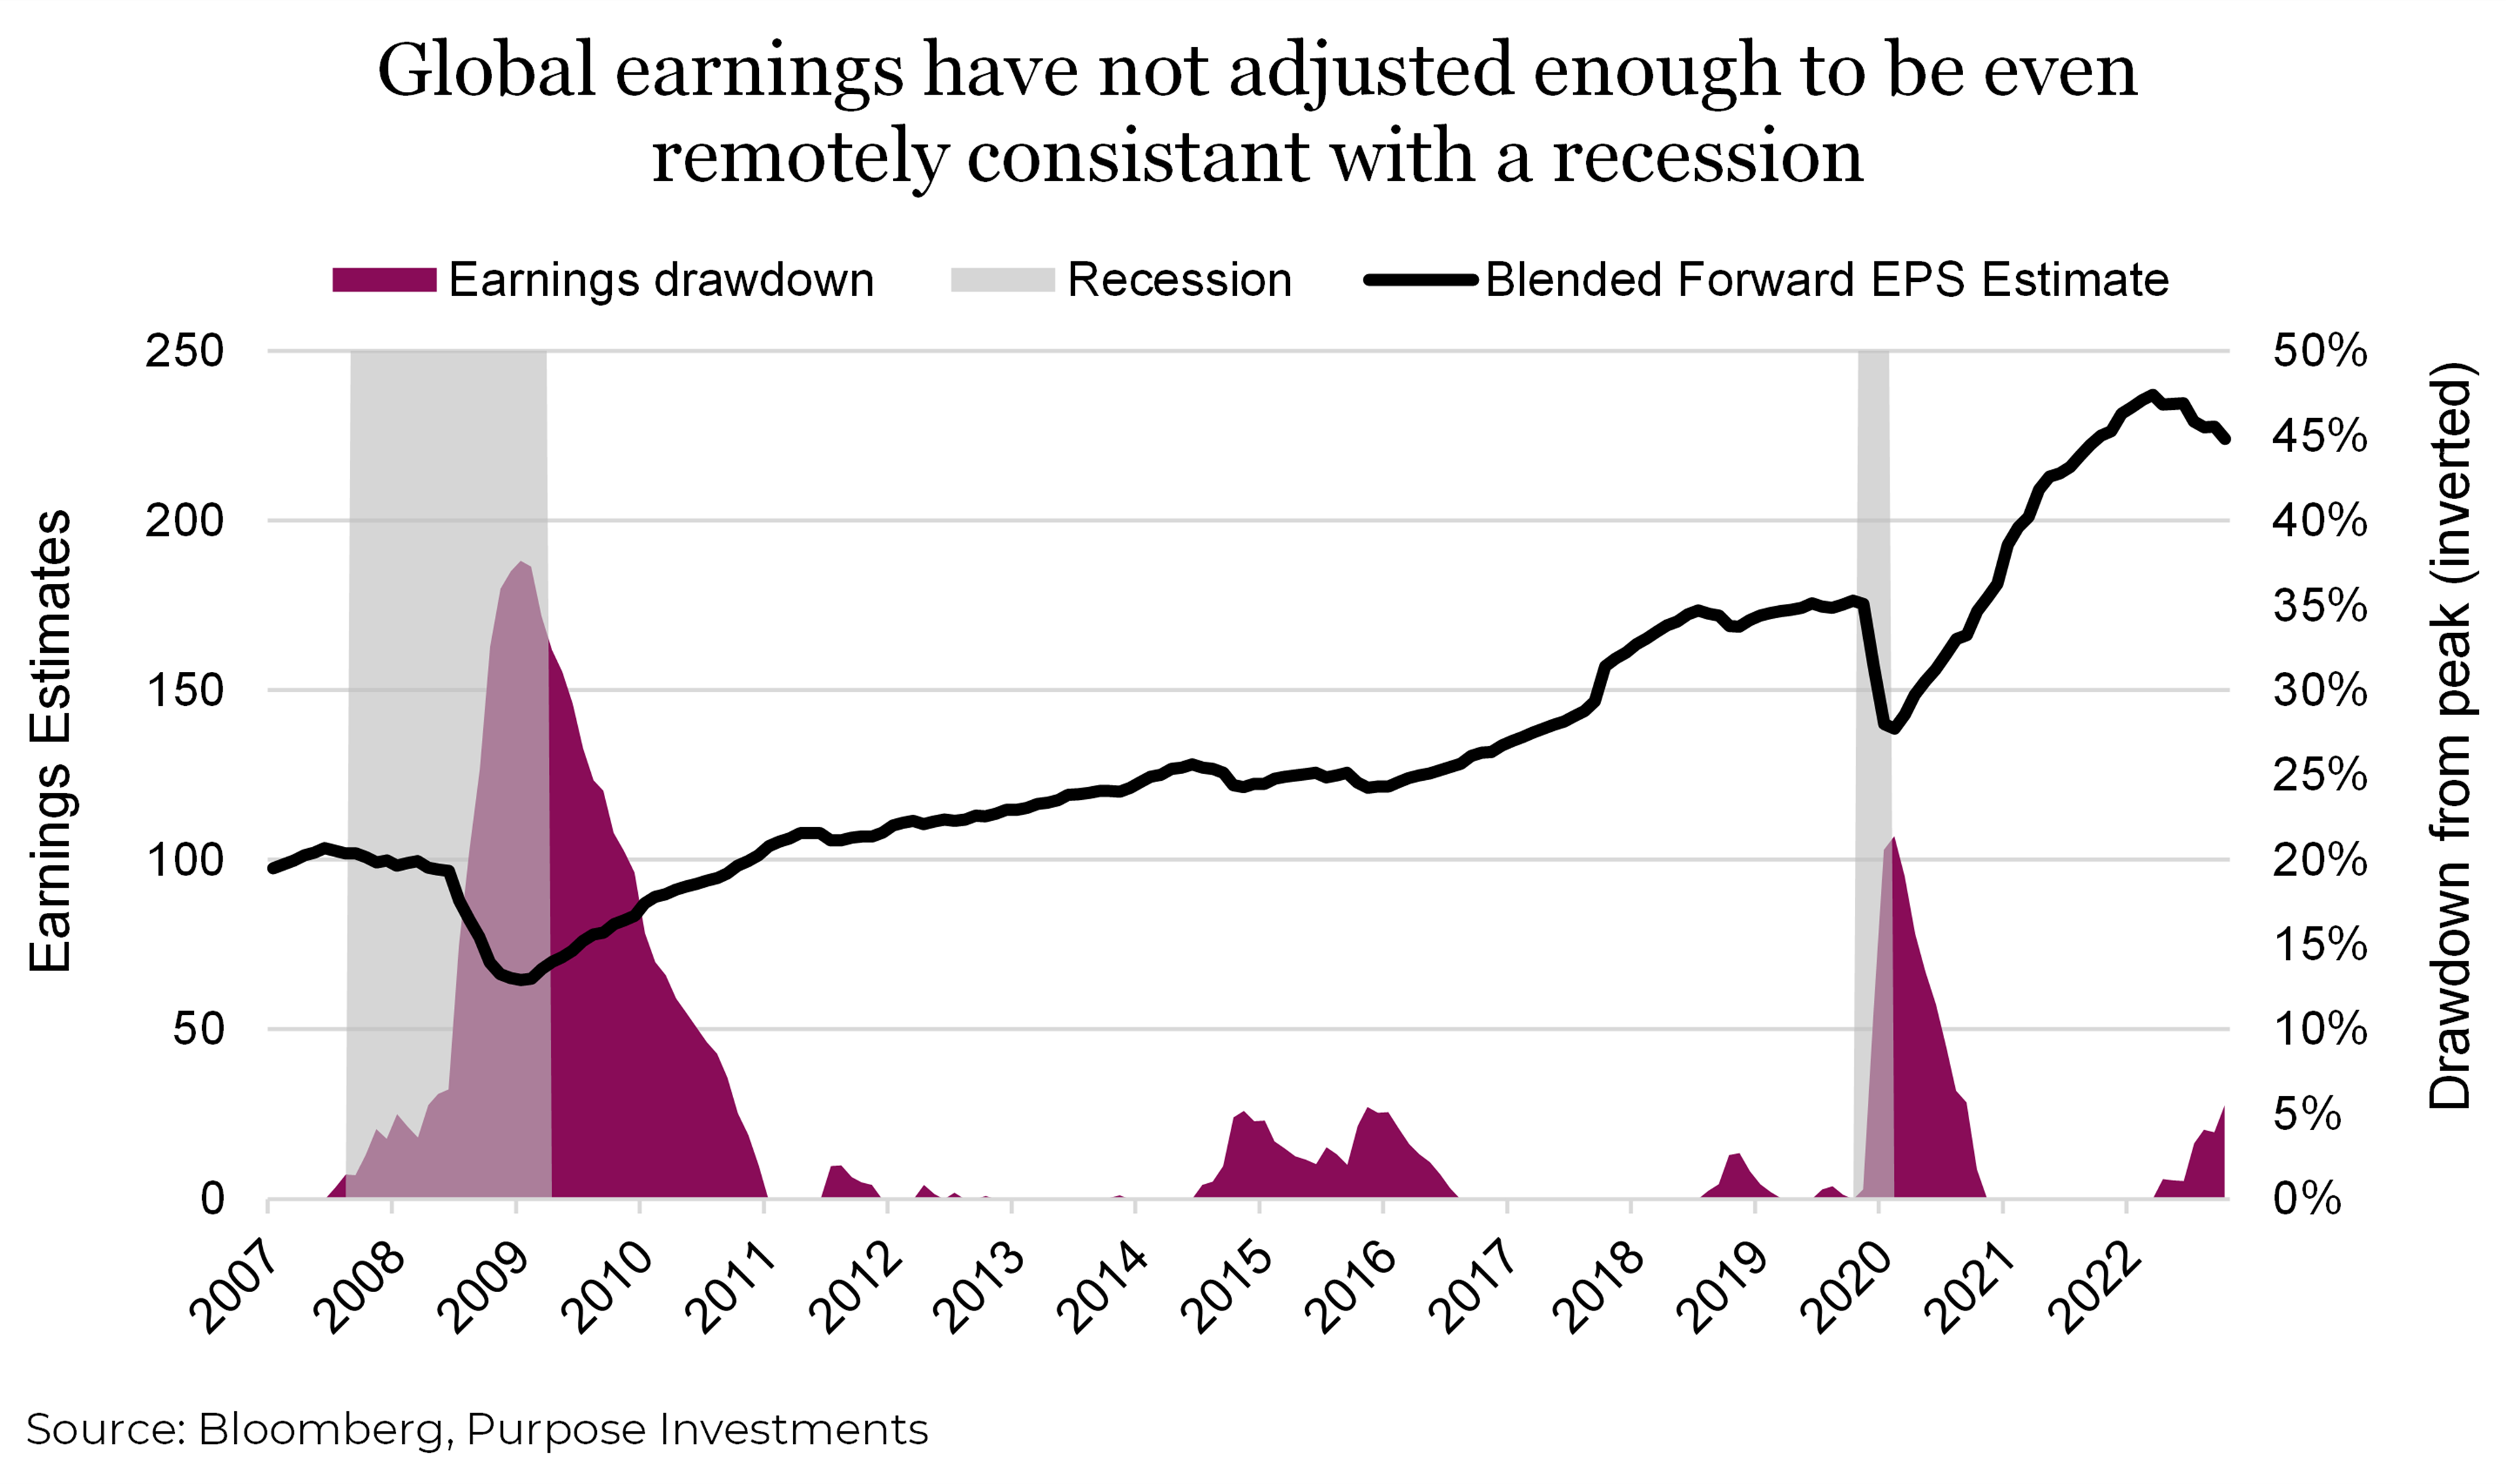 Global earnings have not adjusted enough to be even remotely consistent with a recession